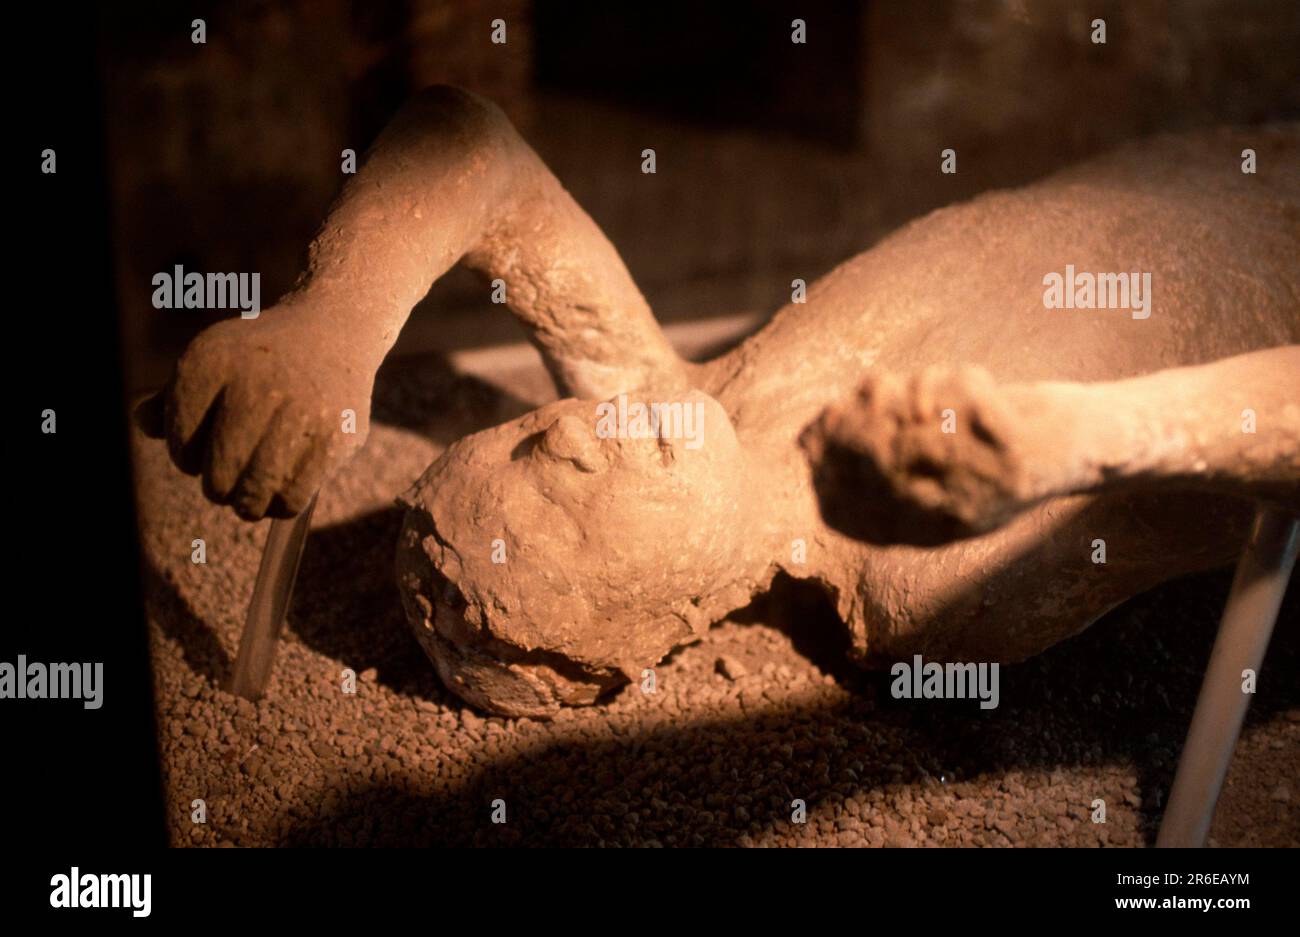 Plaster cast of a human found at excavation, Pompeii, Italy, Plaster cast of a human found at excavation, Pompeii, Italy, Europe, landscape format Stock Photo